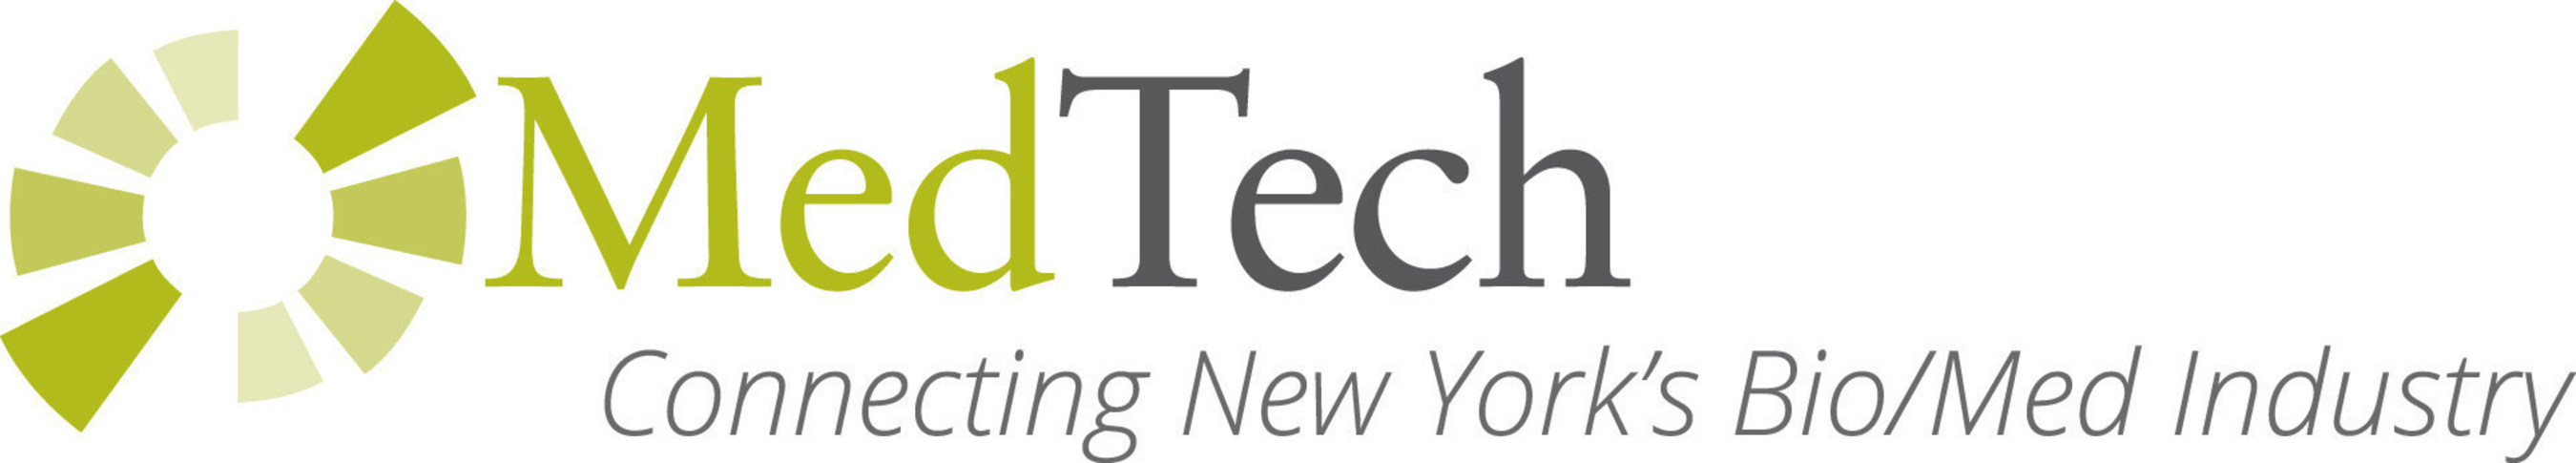 MedTech Association connects New York State's Bio/Med industry through collaboration, education and advocacy